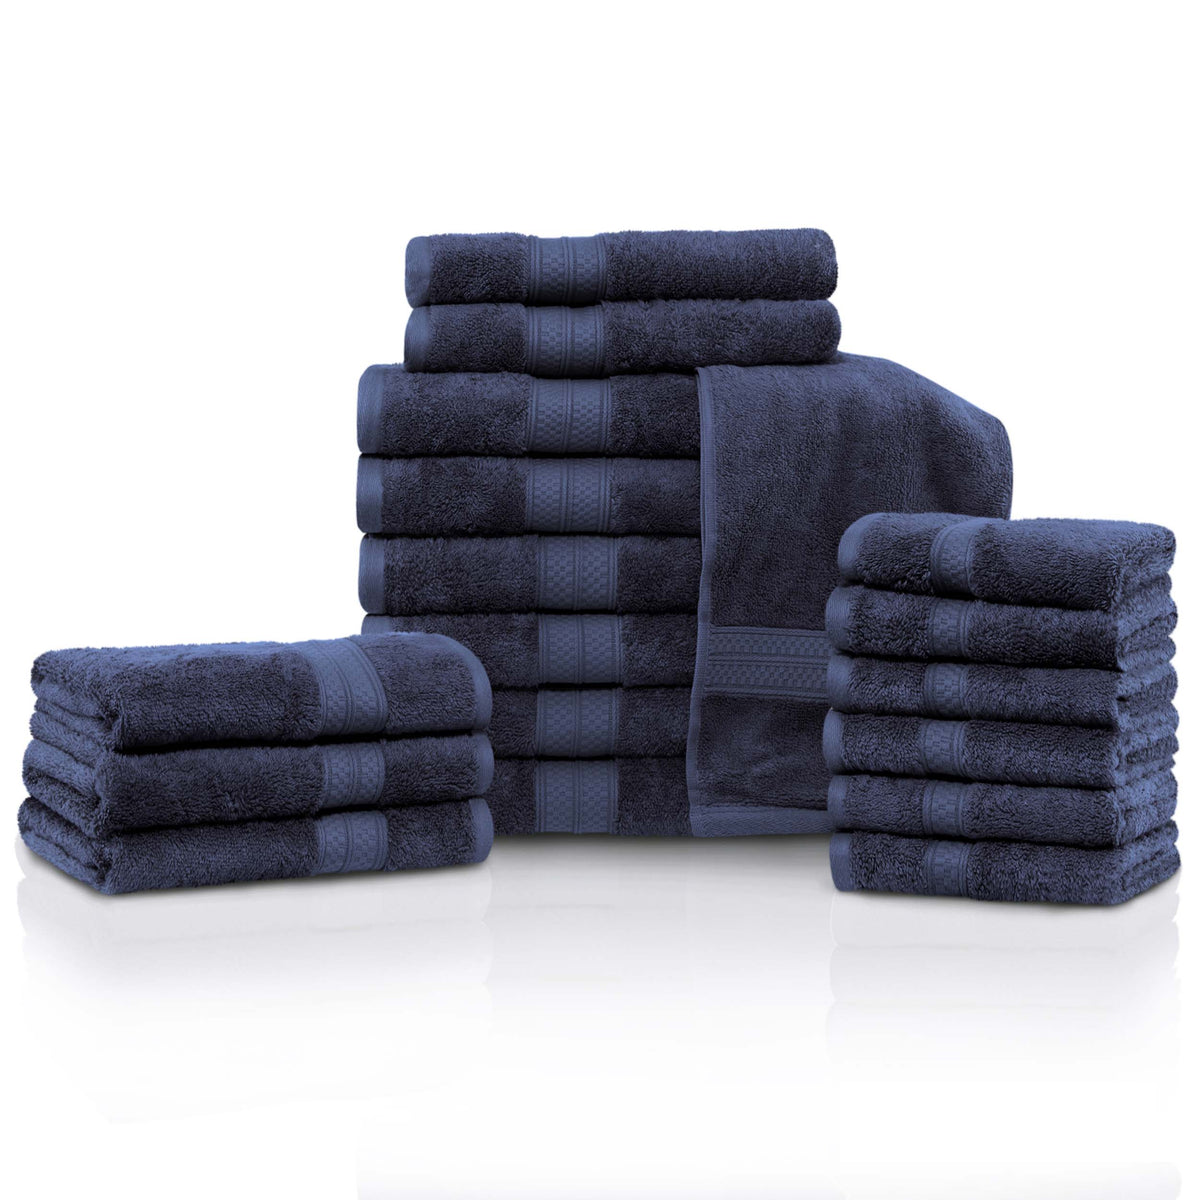 Rayon from Bamboo Cotton Blend Luxury Assorted 18 Piece Towel Set - River Blue